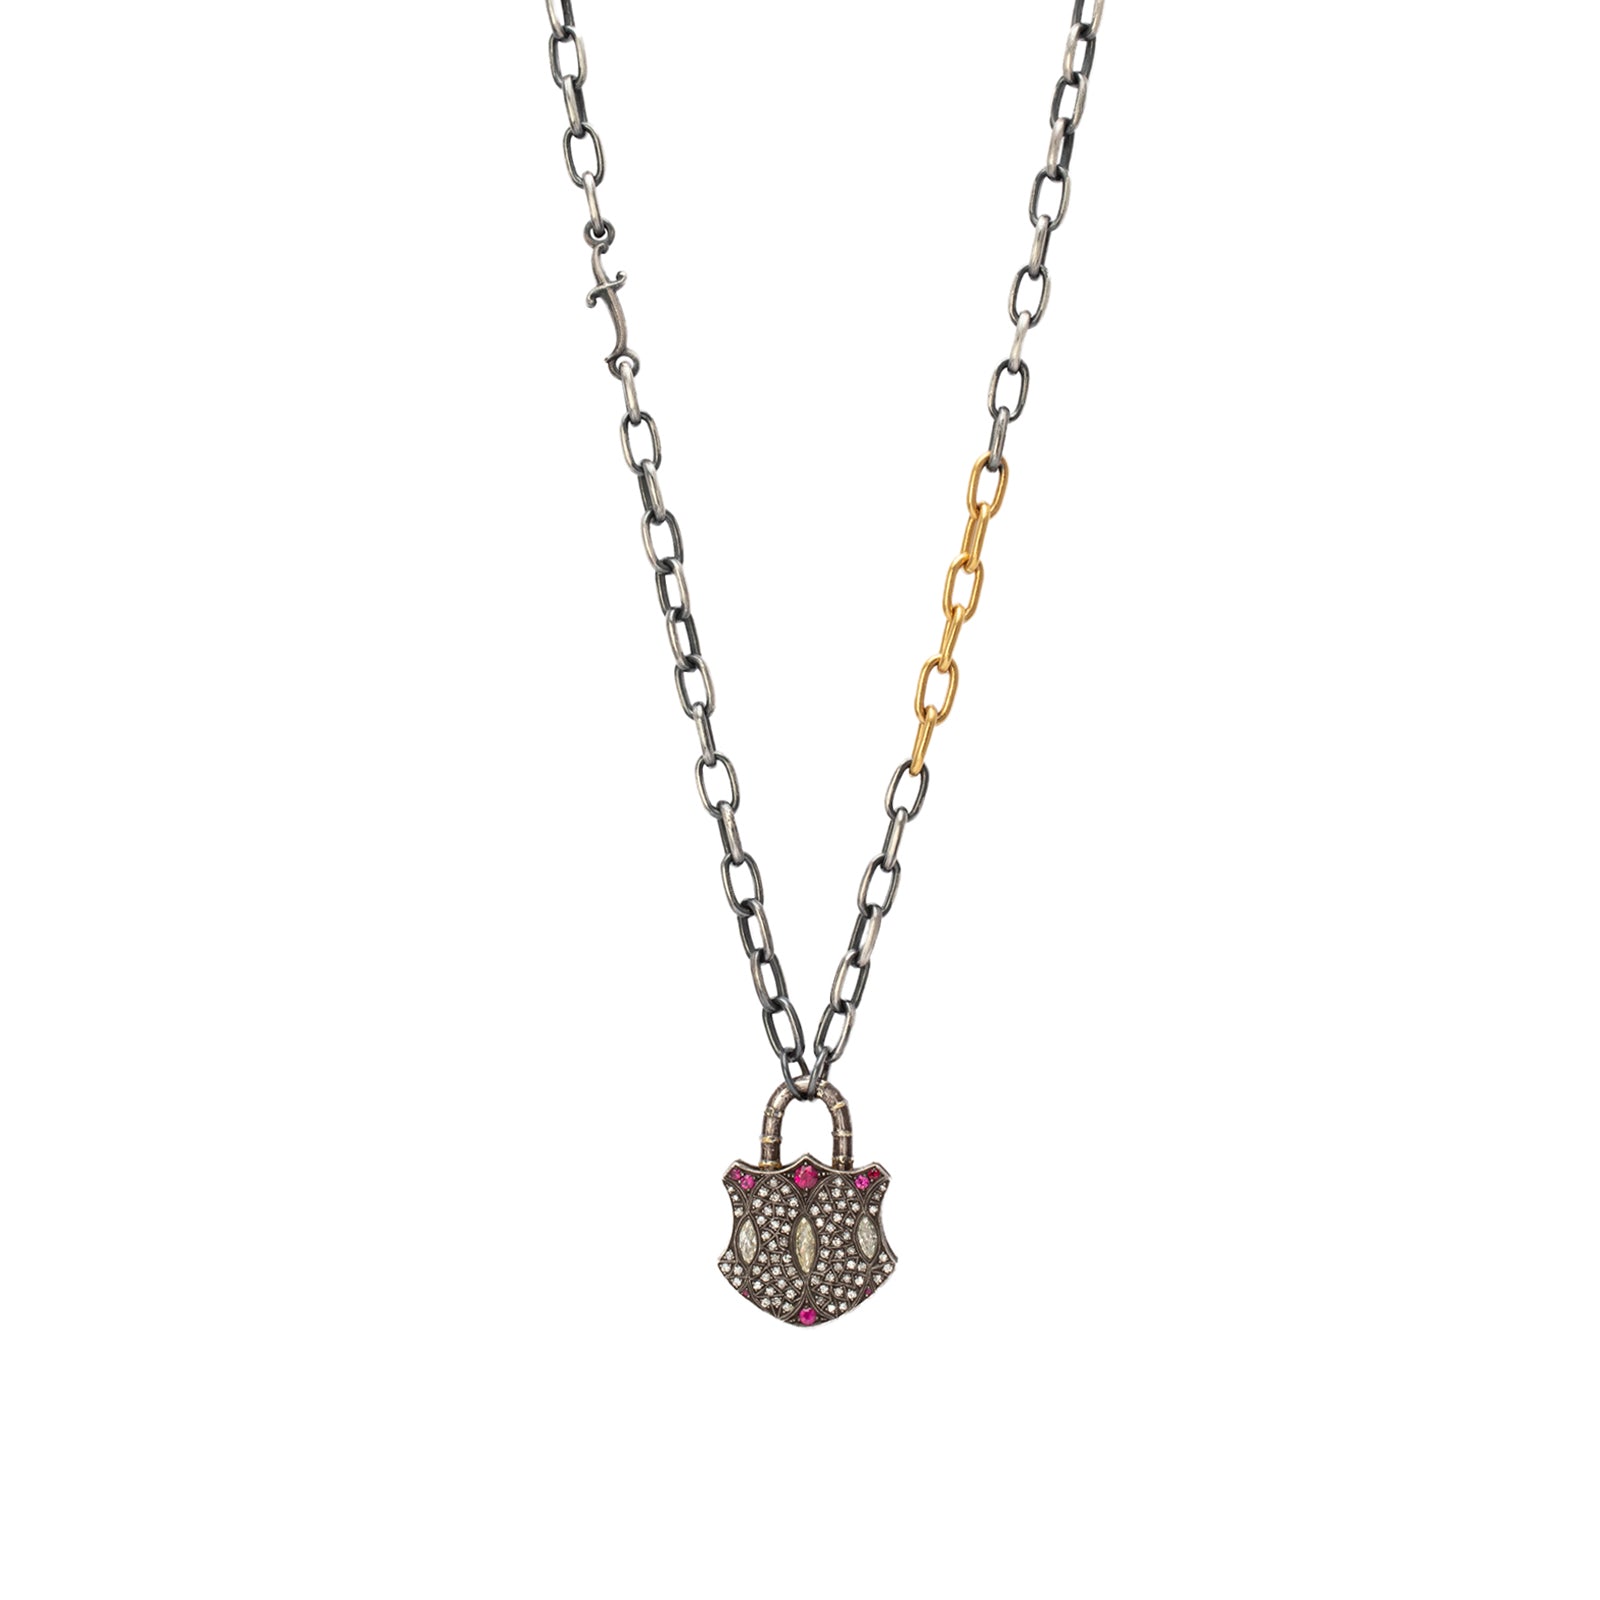 Carbon & Hyde Diamond Padlock Necklace in Yellow Gold